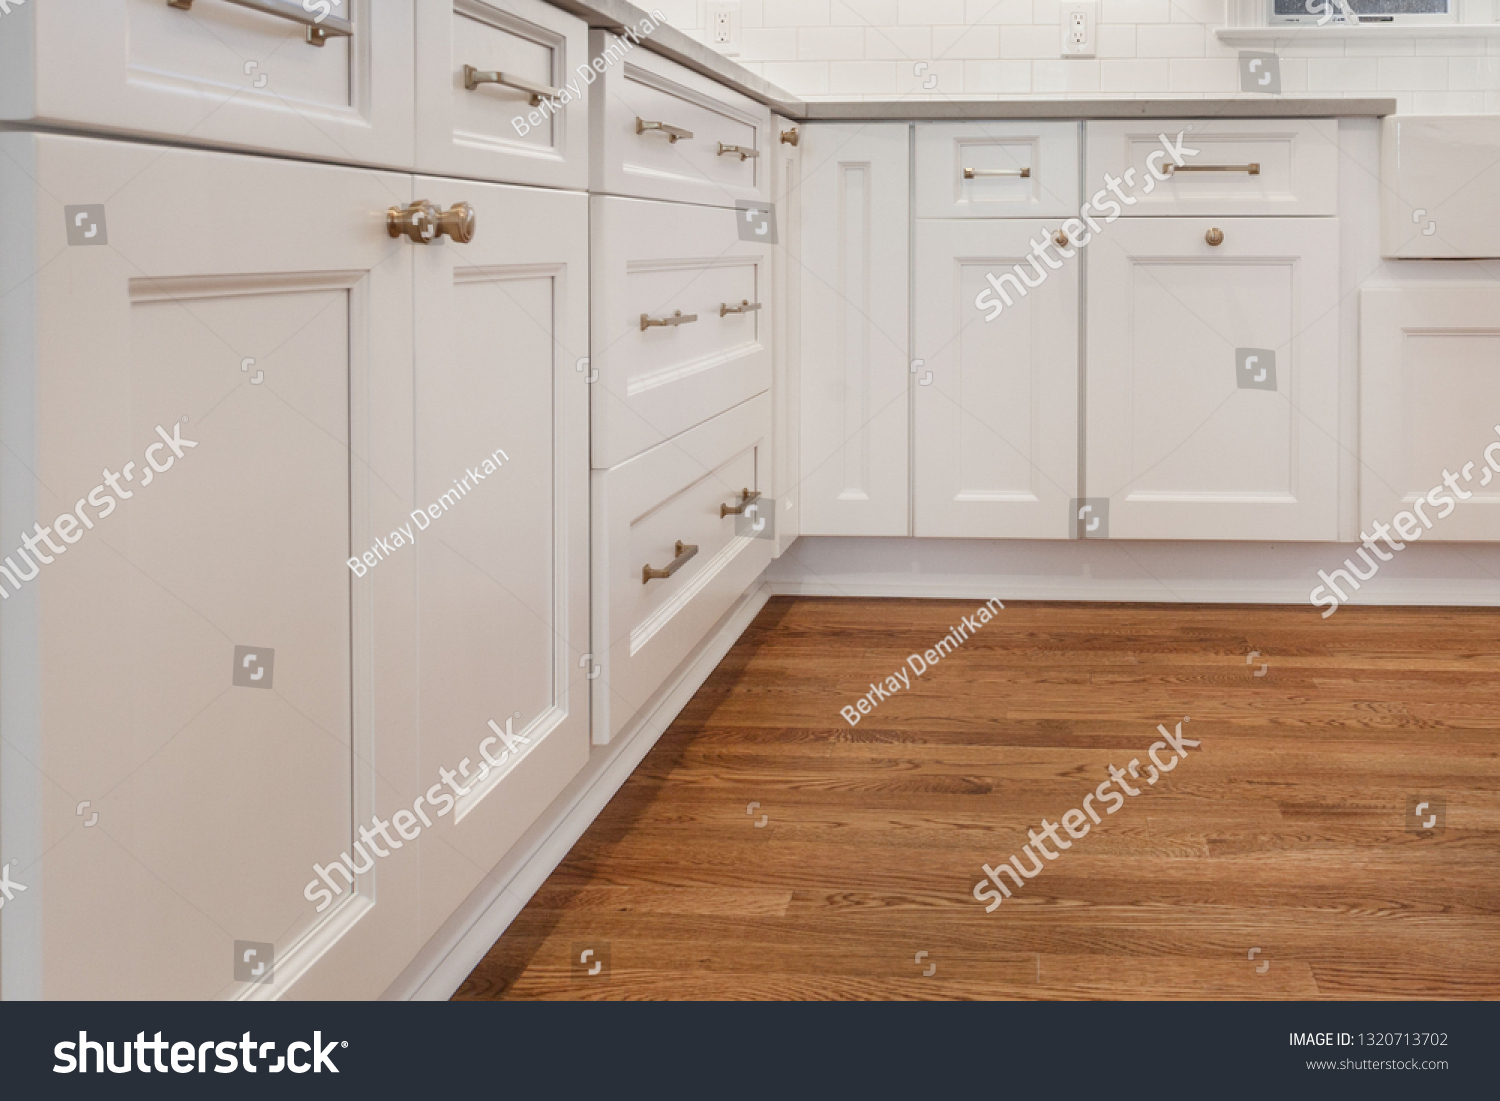 White Kitchen Built Shaker Style Cabinets Stock Photo Edit Now